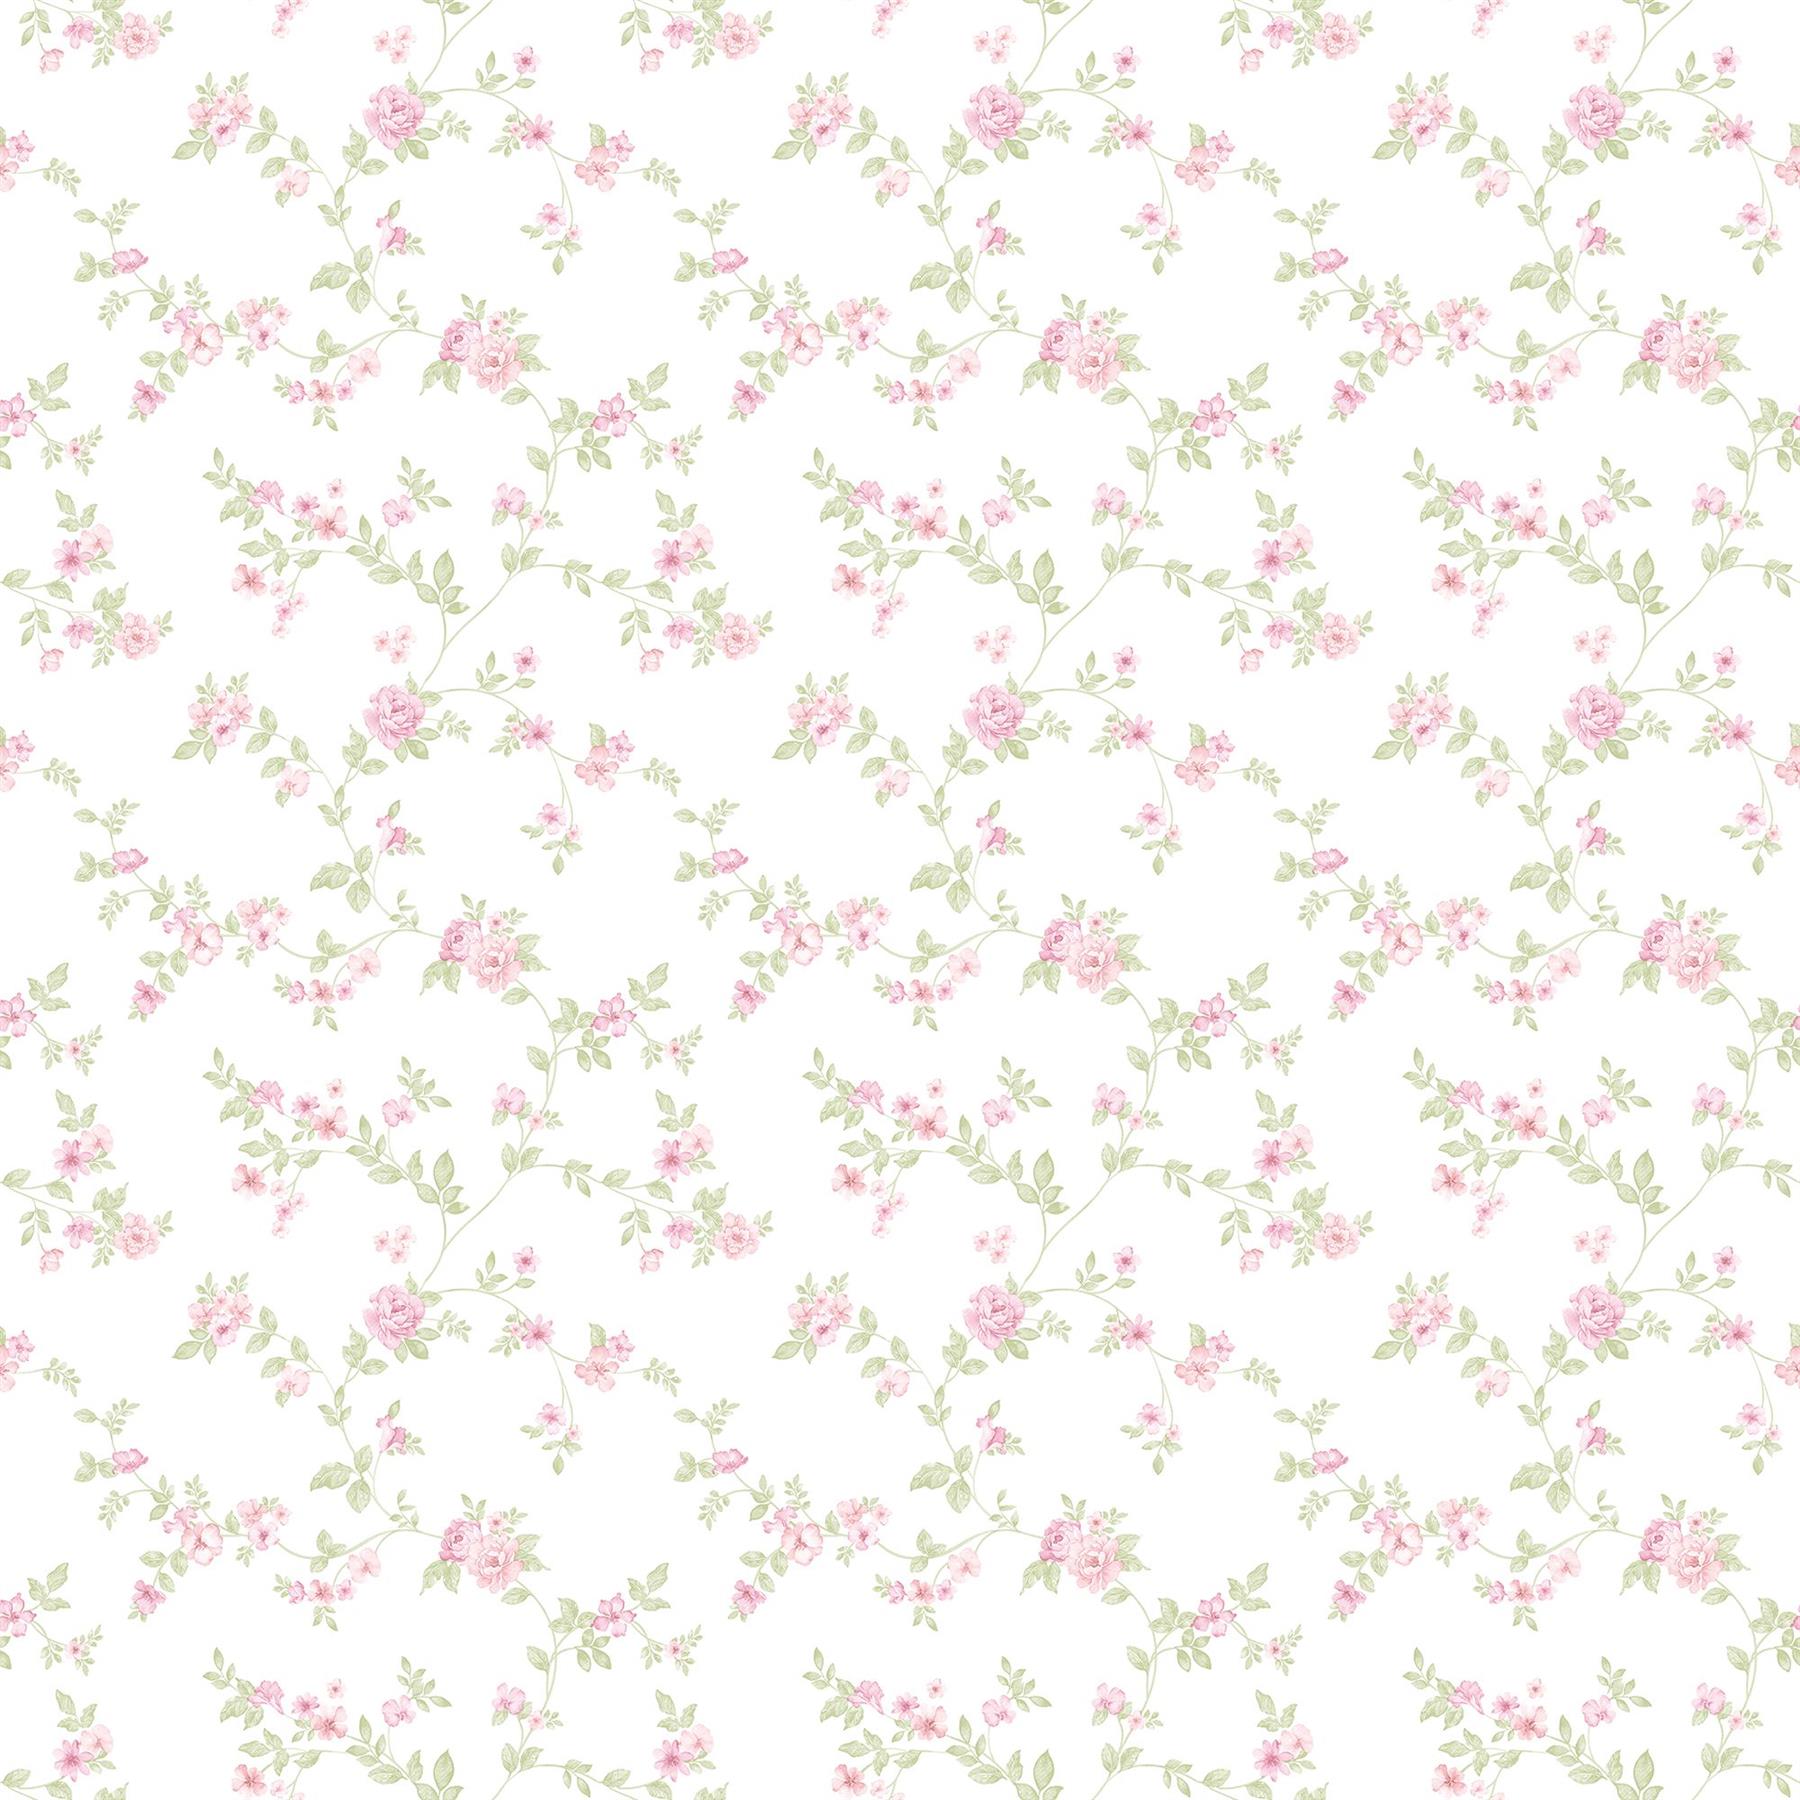 Galerie Delicate Floral Wallpaper - G56649 - Pink / Green